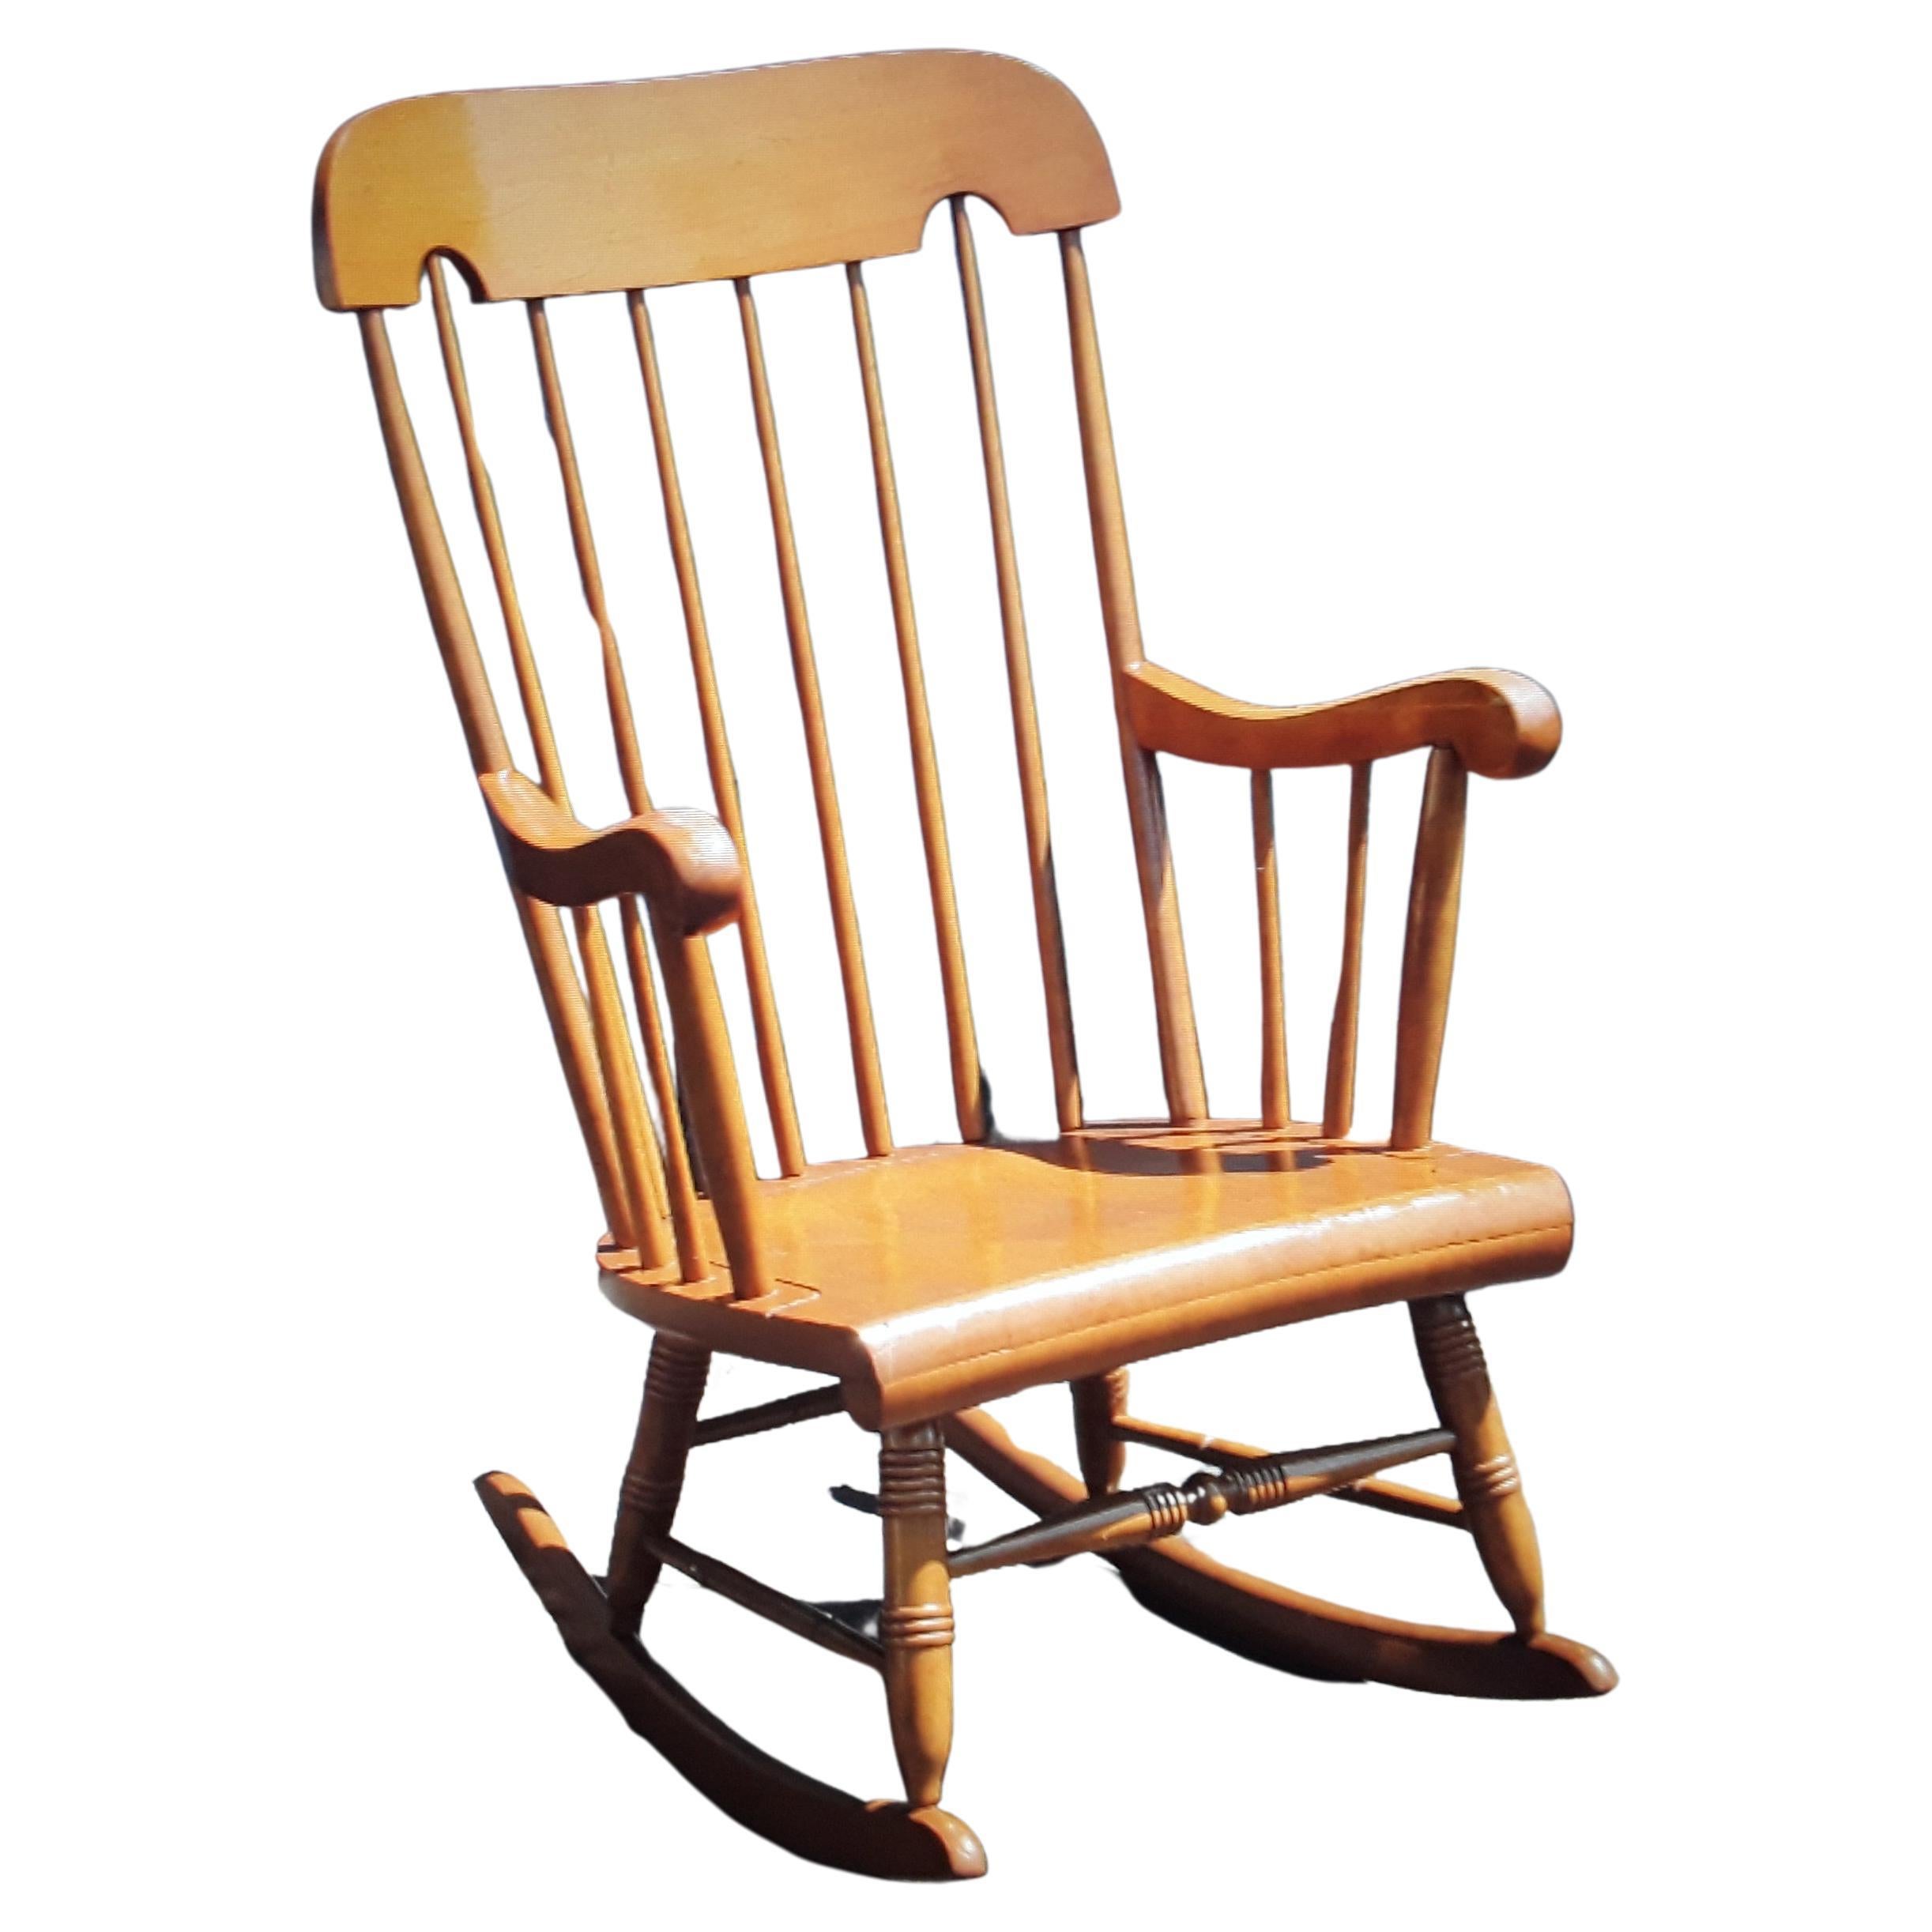 1960's Vintage Rocking Chair For Sale